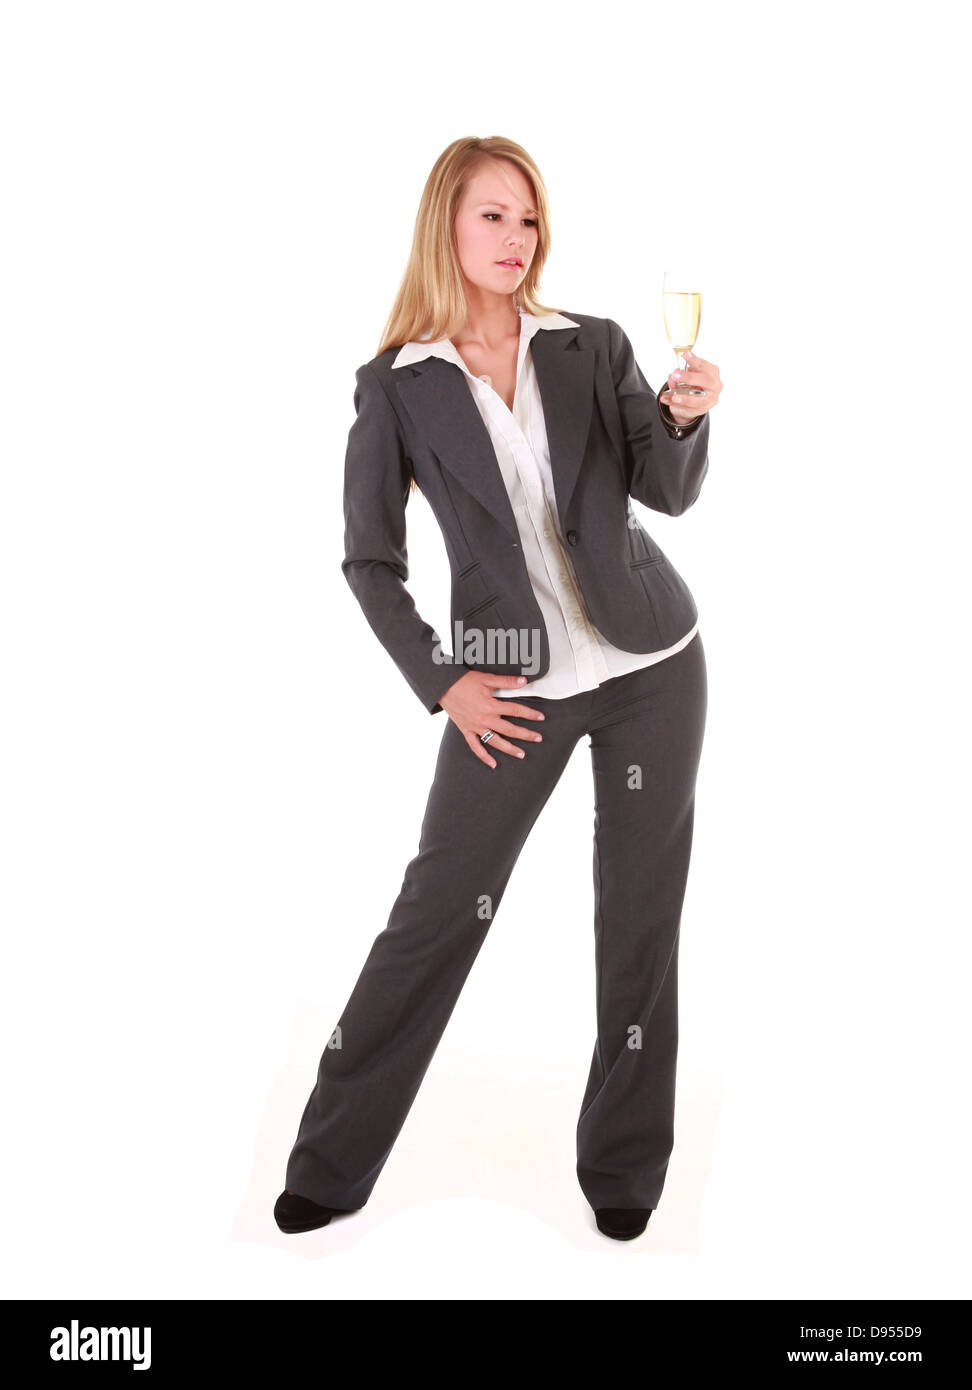 A Beautiful Young Blond Business Lady Is Holding A Glass Of Champagne She Is Dressed In A Gray